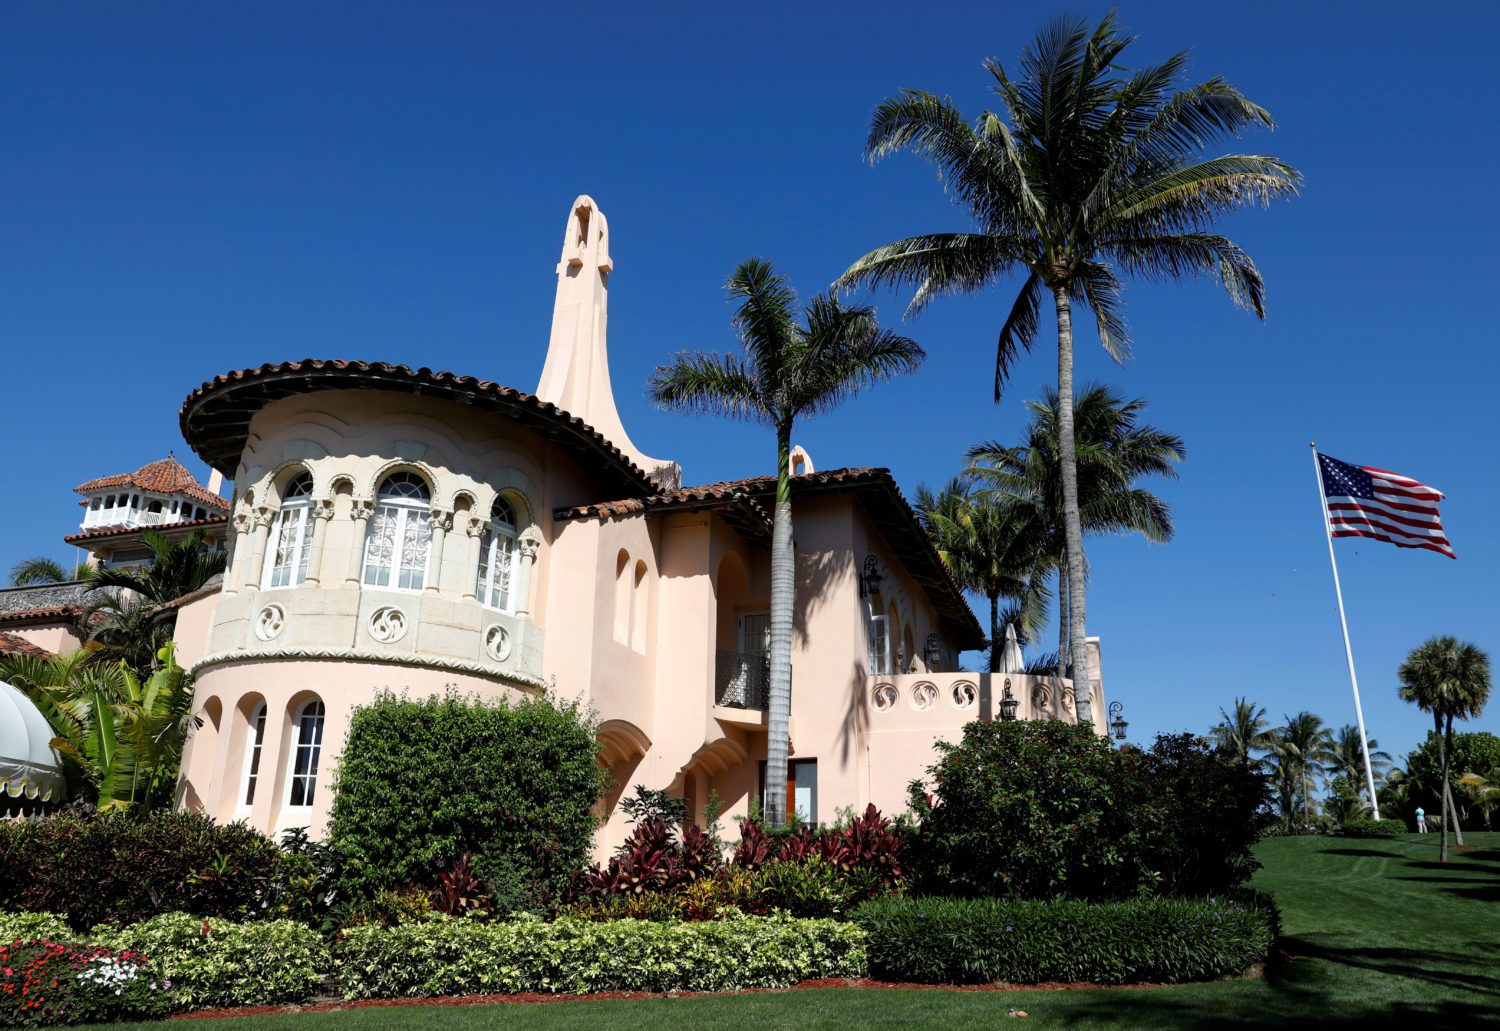 Republican Candidates Appear To Have Bought Trump Endorsements With Mar-a-Lago Spending